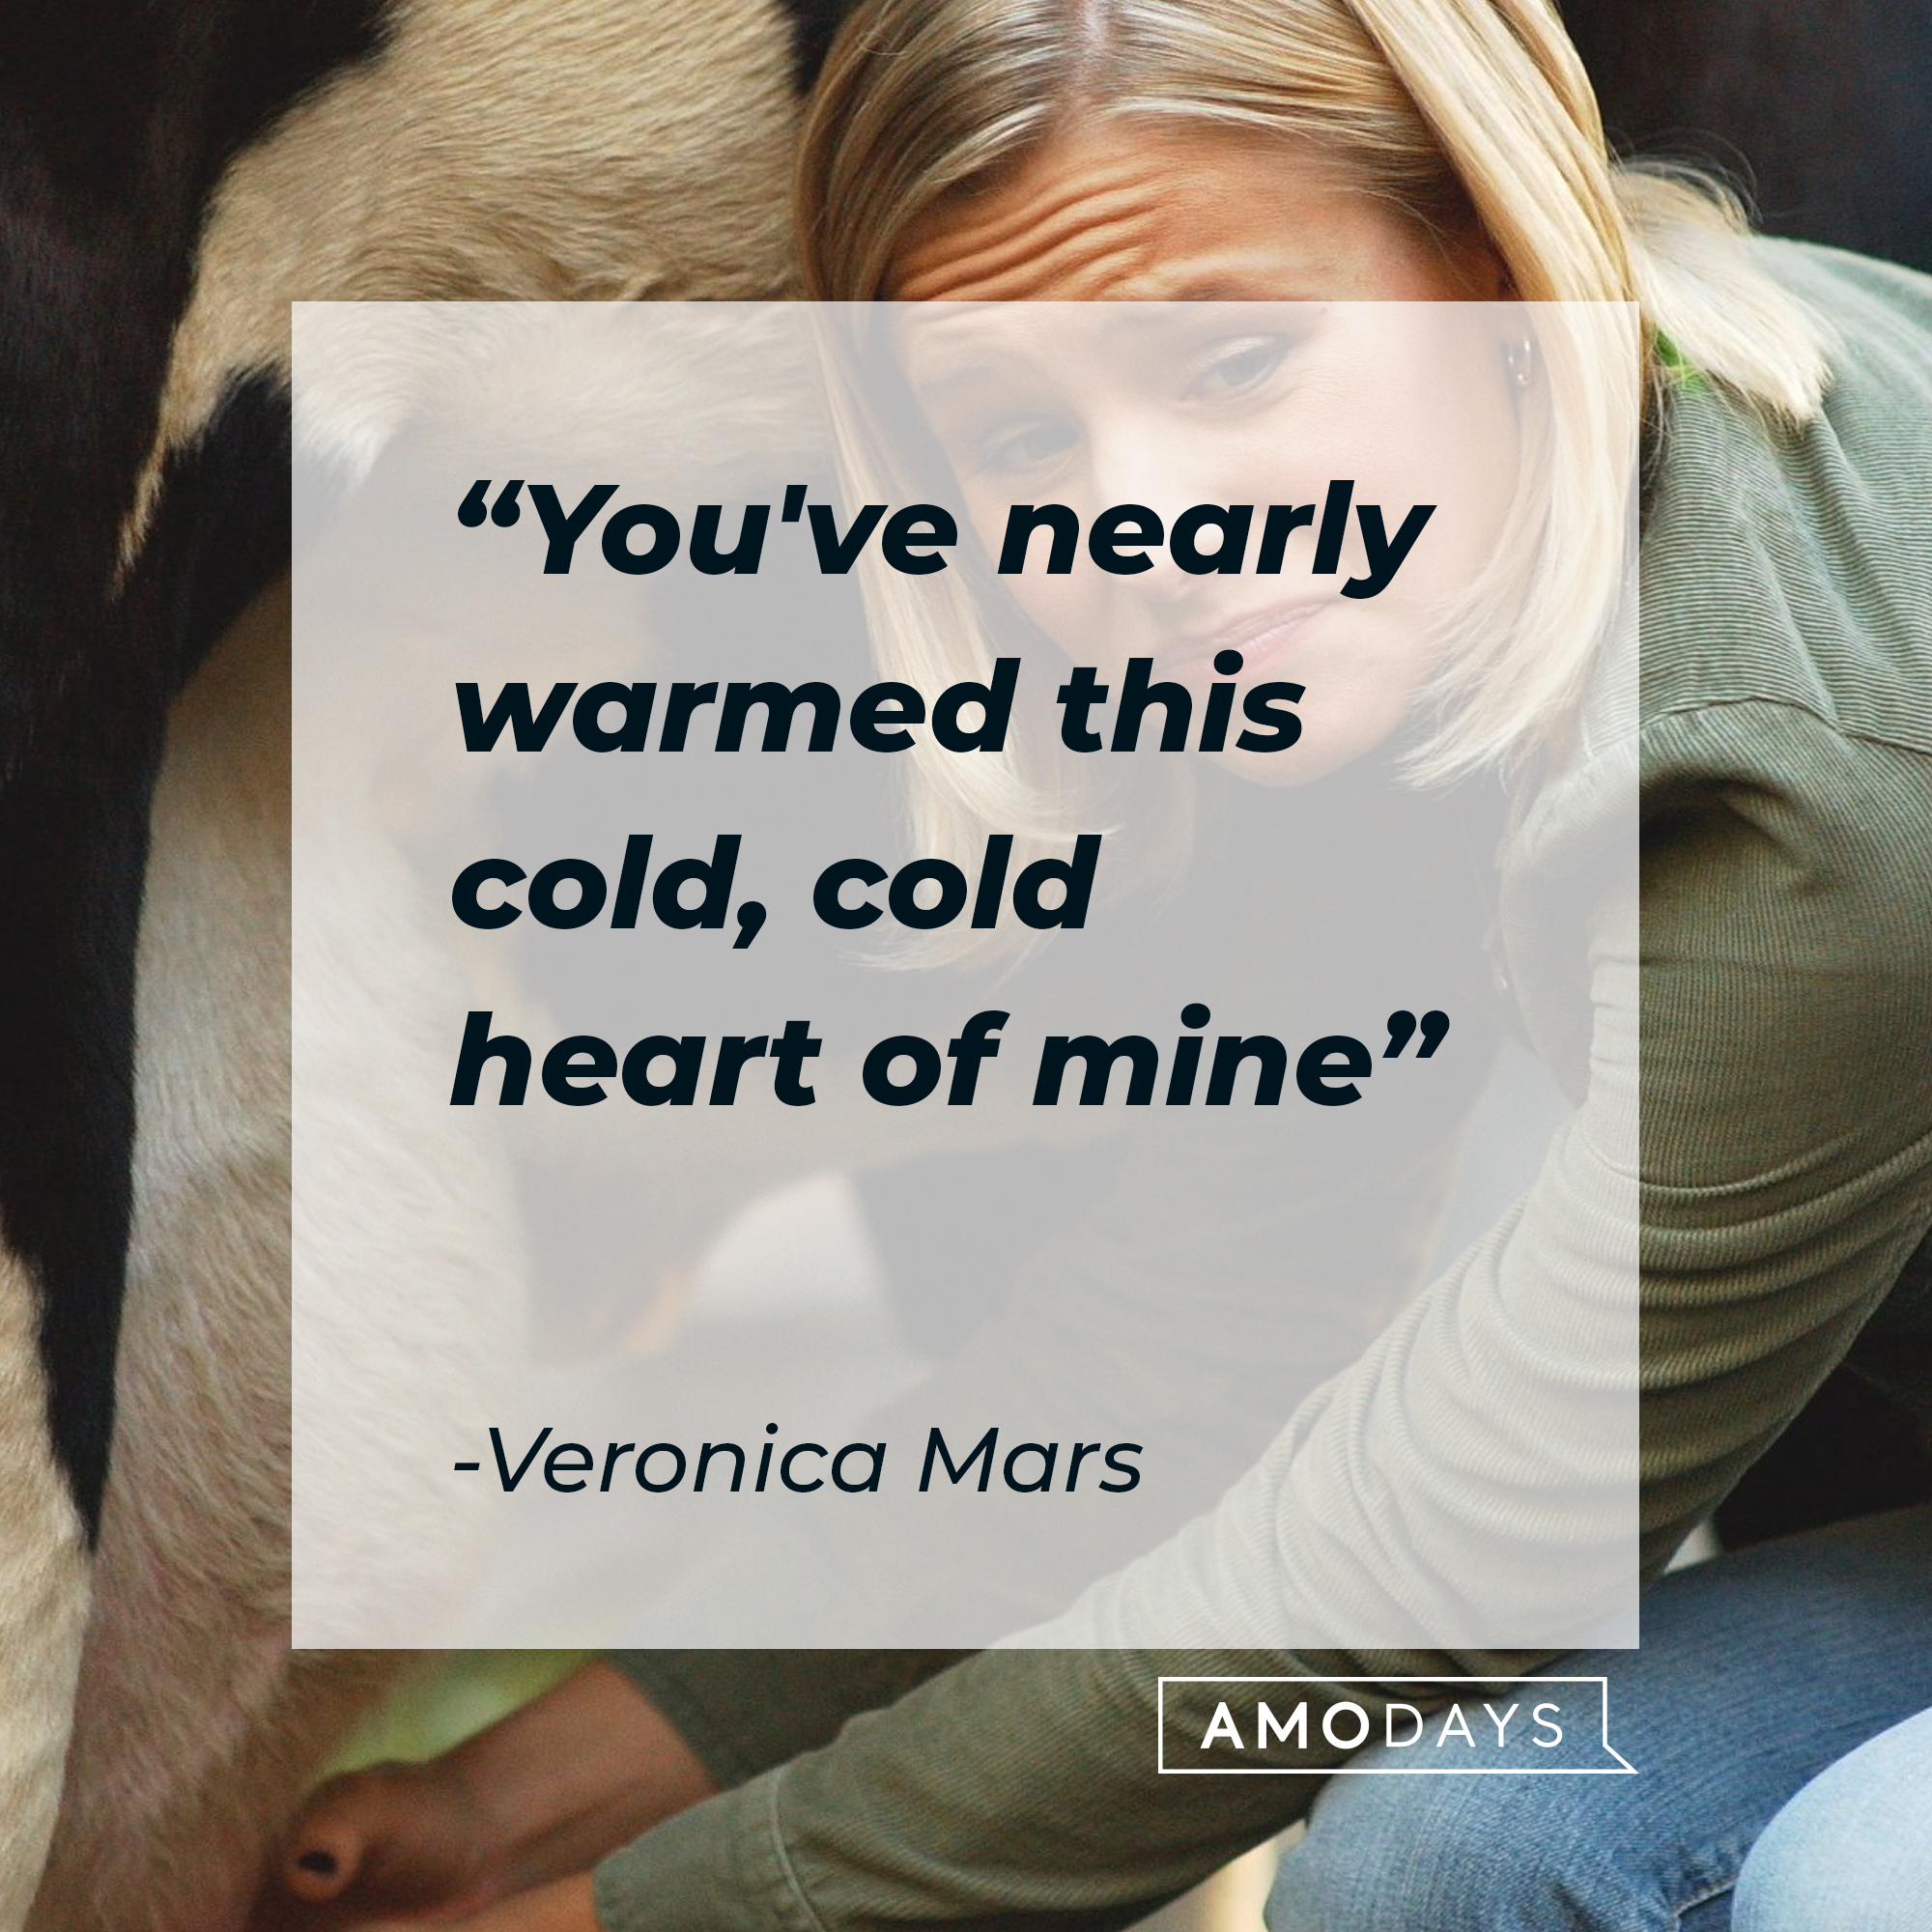 Veronica Mars' quote: "You've nearly warmed this cold, cold heart of mine" | Source: facebook.com/VeronicaMars